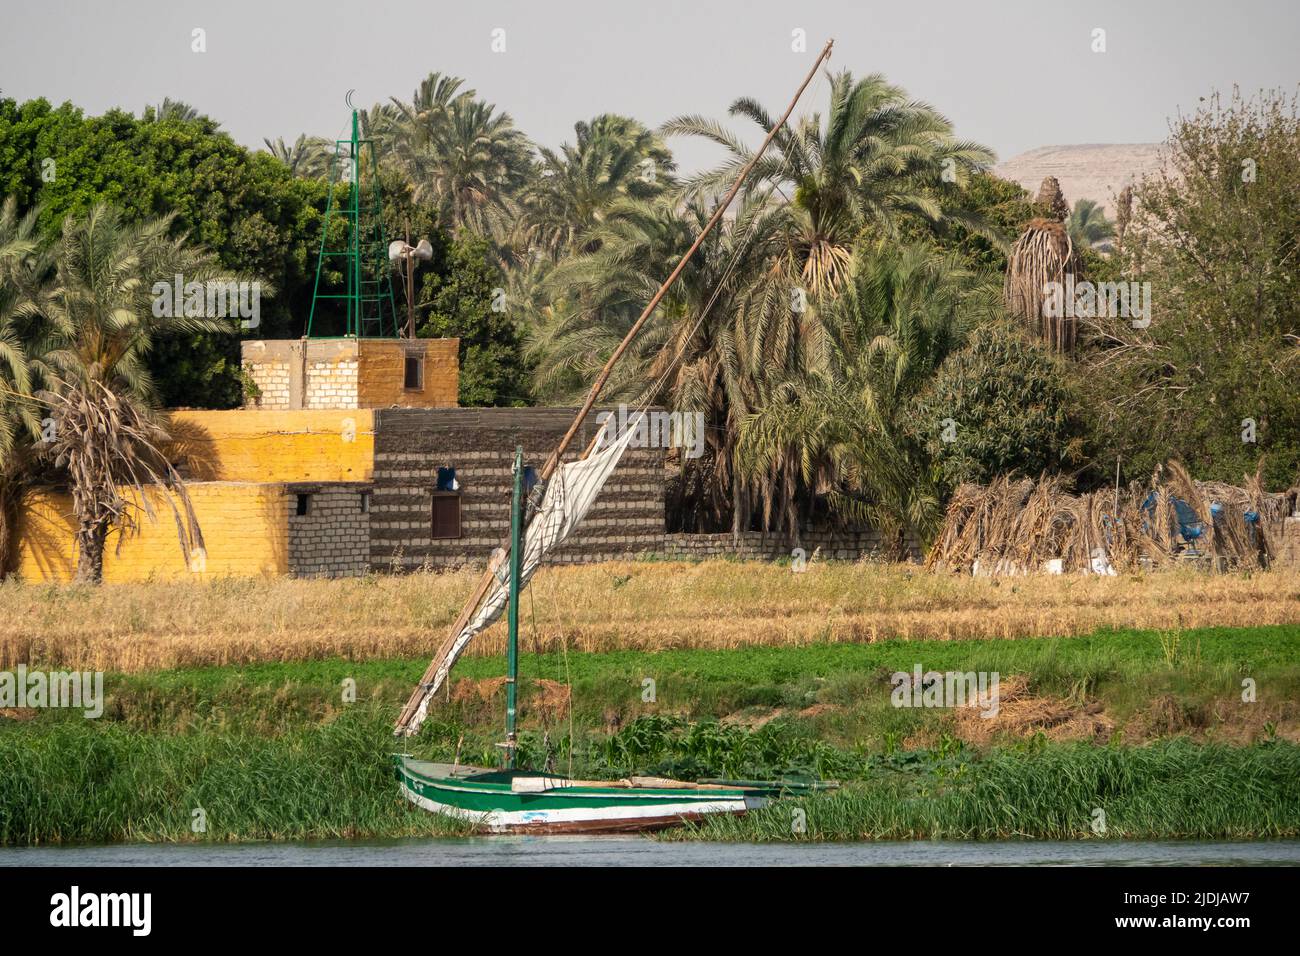 A traditional felucca moored in the reeds on the banks of the river Nile with vegetation and domestic scenes behind including small mosque Stock Photo